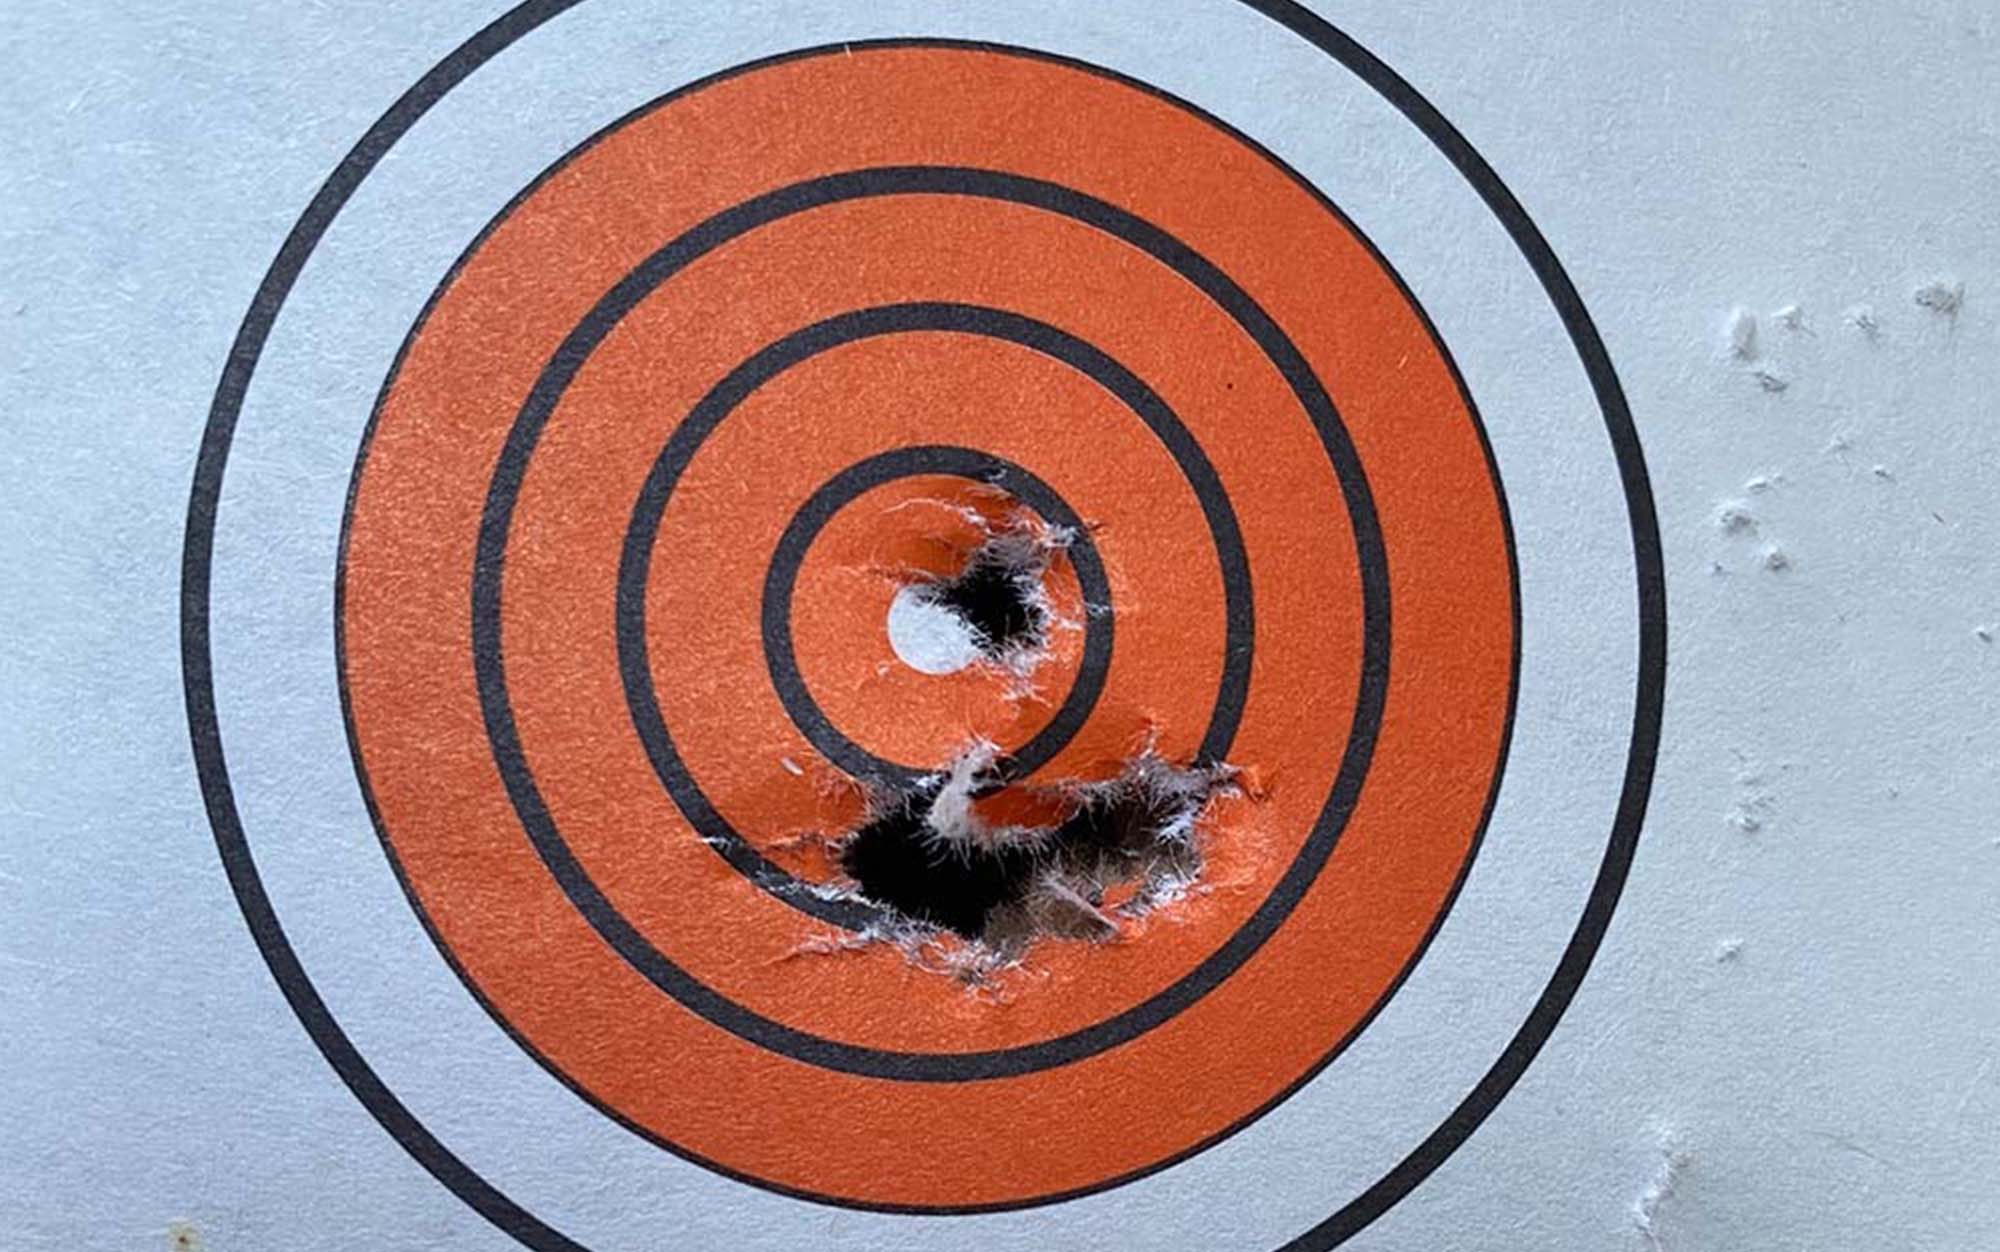 A 50-yard group with the Avenger and Diabolo pellets.